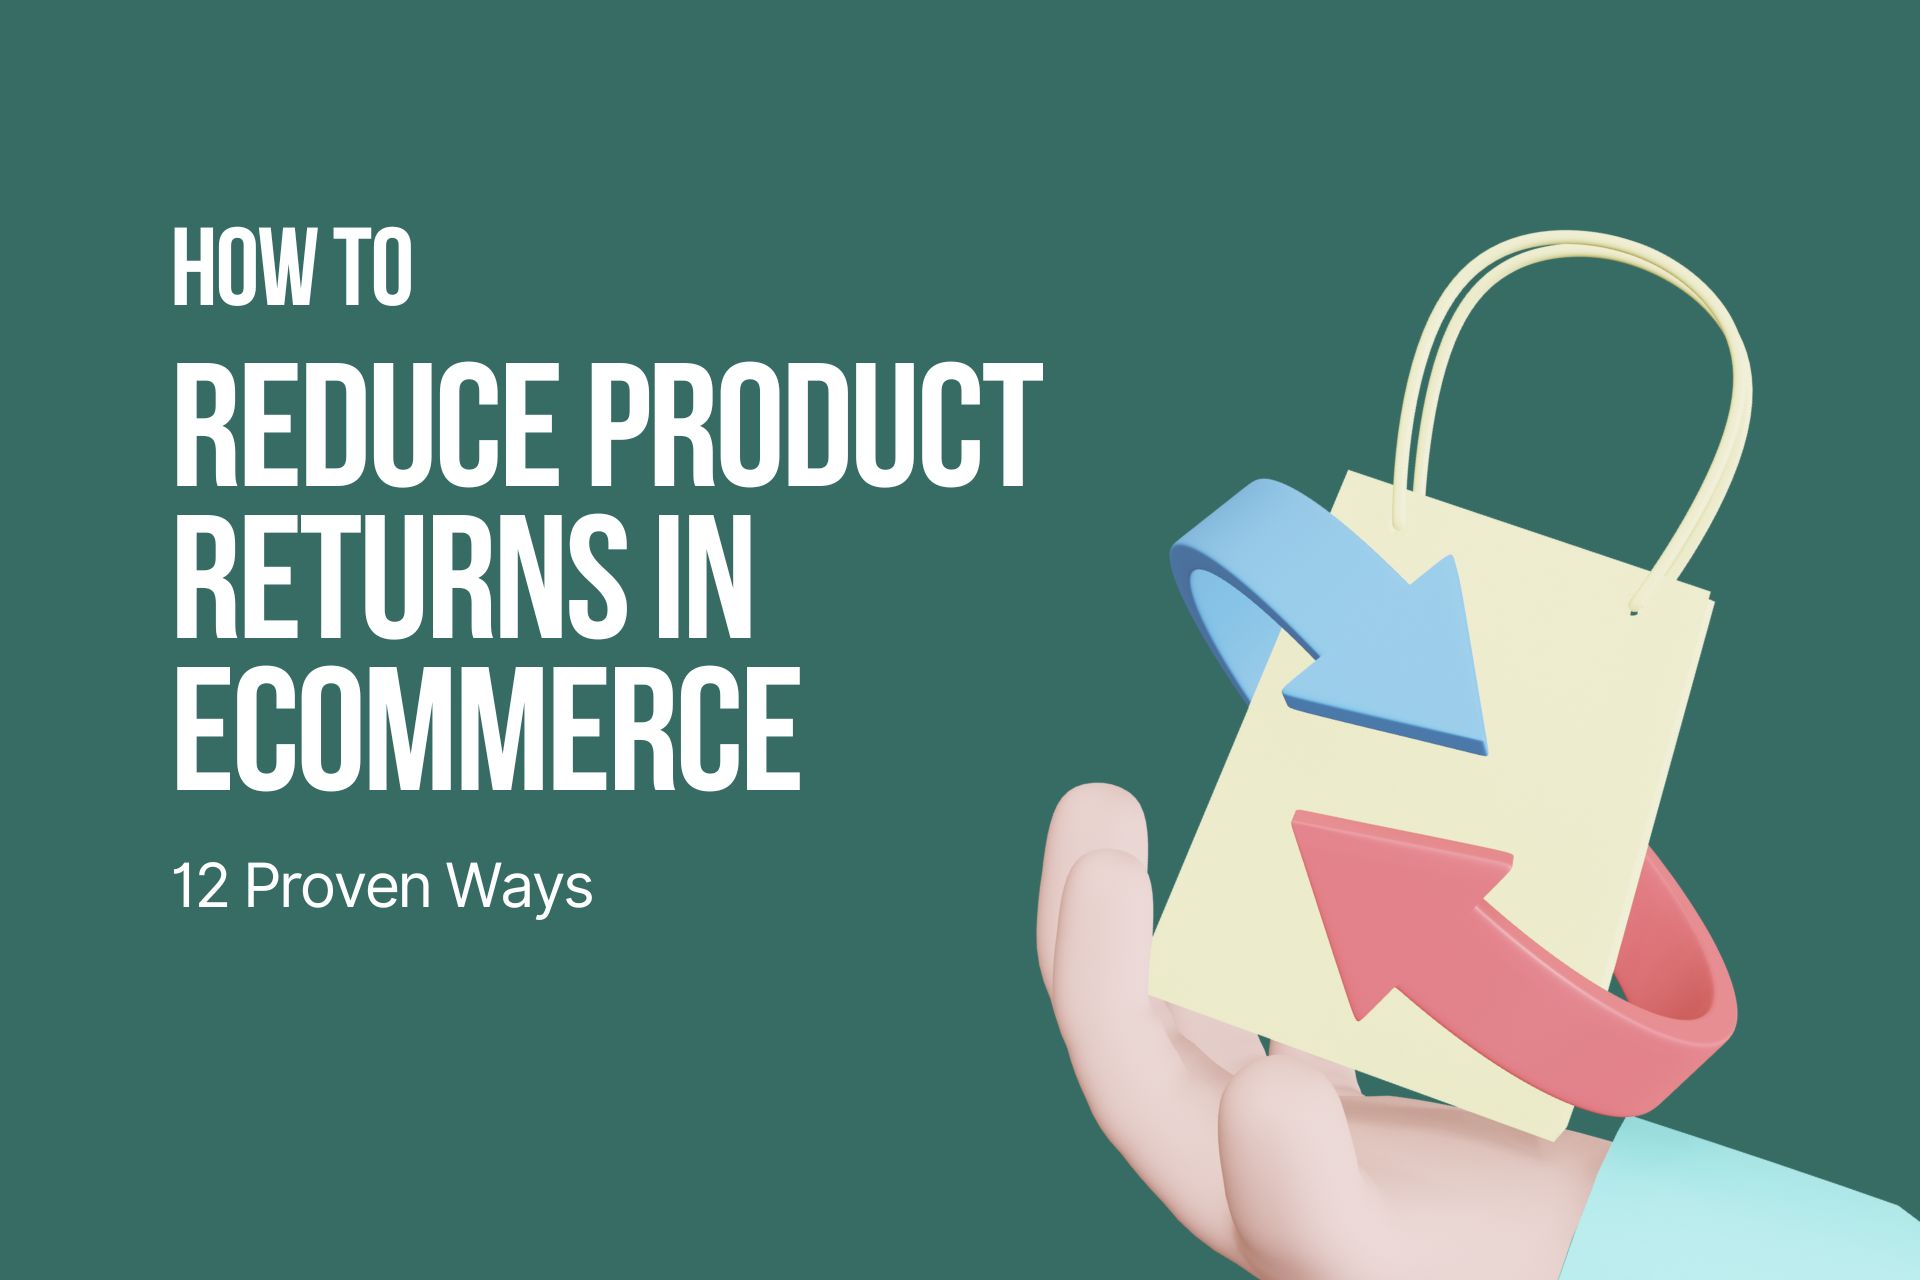 How to Reduce Product Returns in Ecommerce: 12 Proven Ways